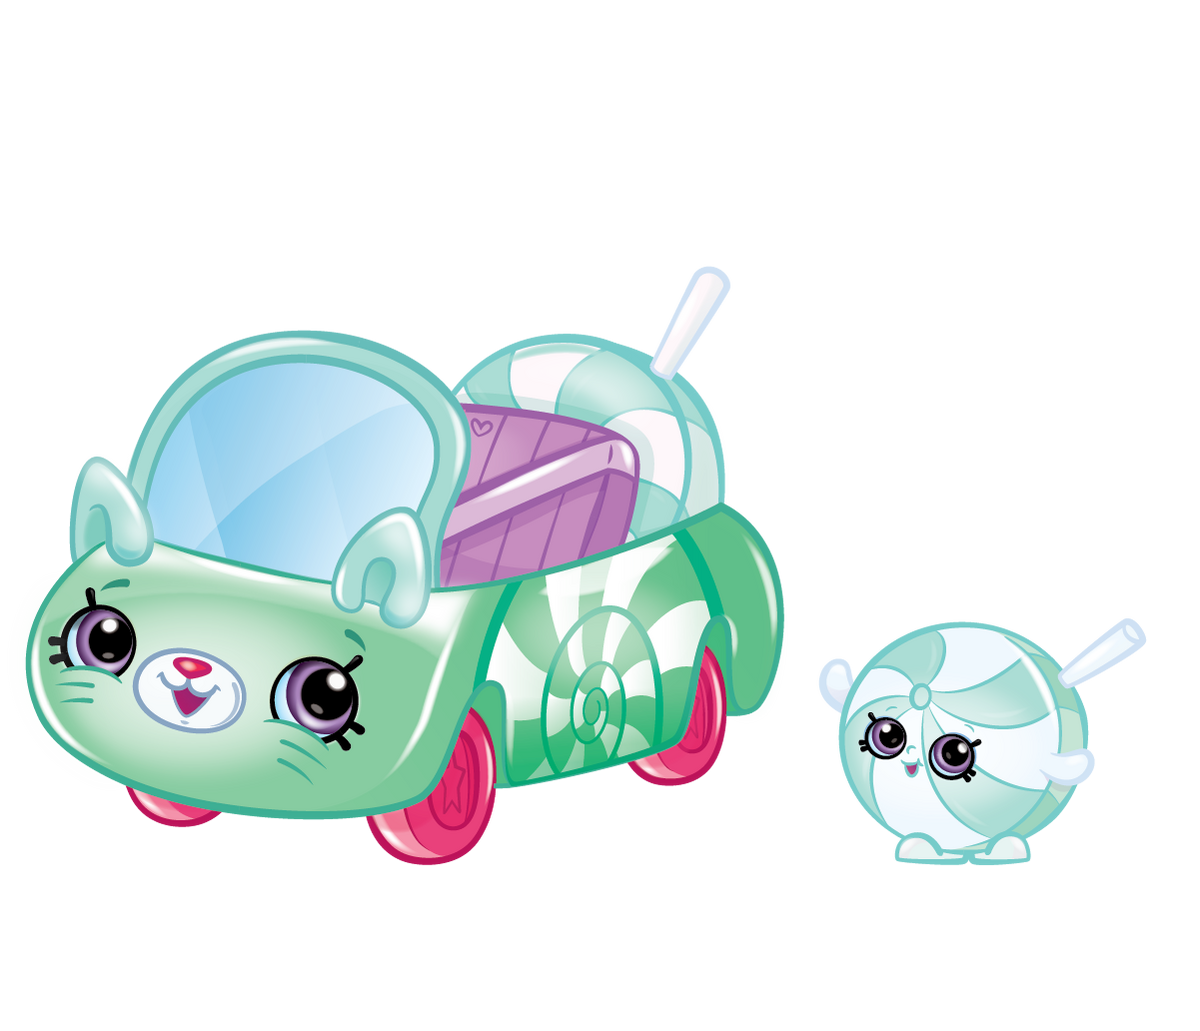 https://static.wikia.nocookie.net/shopkins/images/0/0f/CCS1_Mint_Sprinter.png/revision/latest/scale-to-width-down/1200?cb=20190411112514